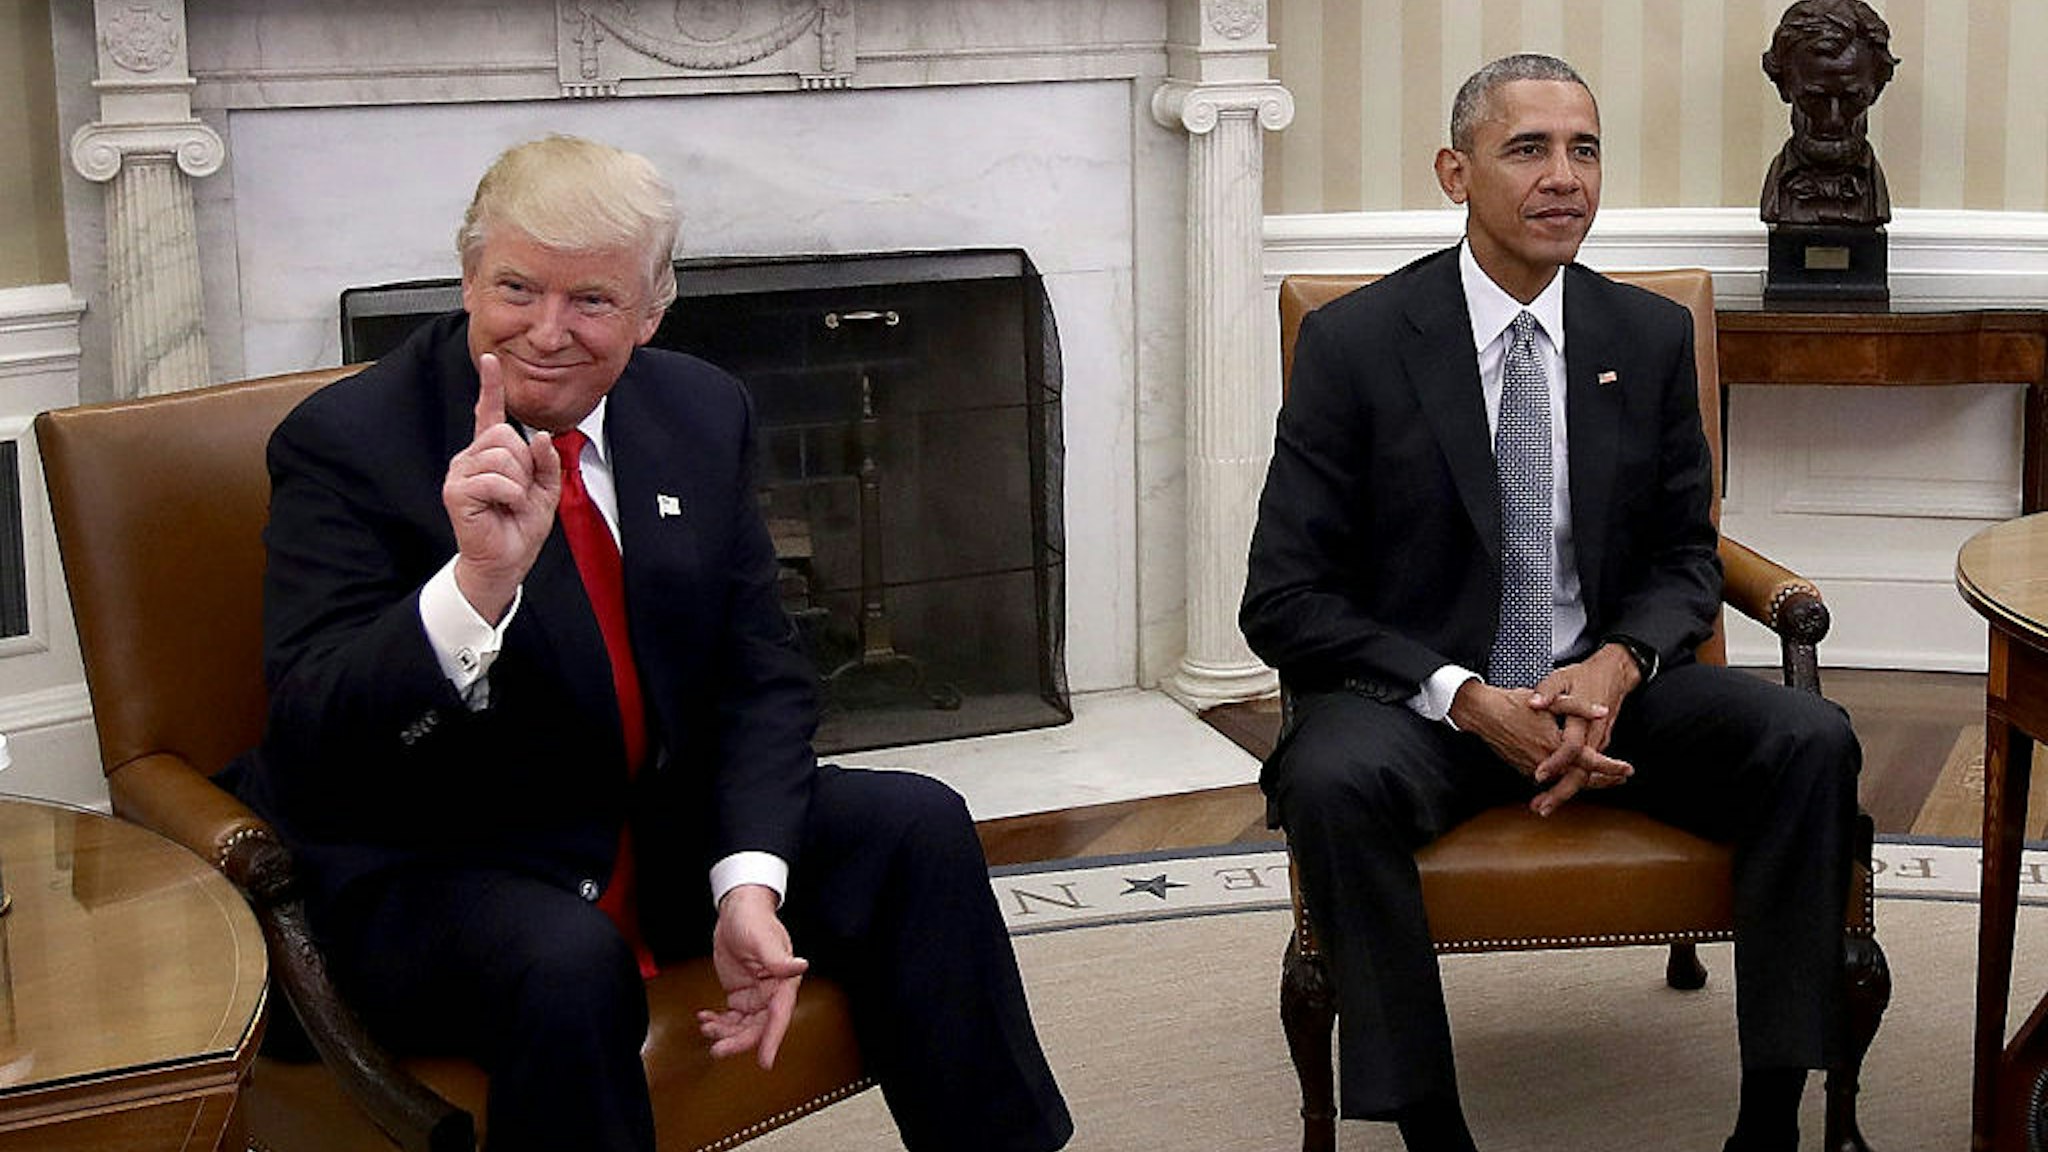 WASHINGTON, DC - NOVEMBER 10: President-elect Donald Trump (L) talks after a meeting with U.S. President Barack Obama (R) in the Oval Office November 10, 2016 in Washington, DC. Trump is scheduled to meet with members of the Republican leadership in Congress later today on Capitol Hill. (Photo by Win McNamee/Getty Images)